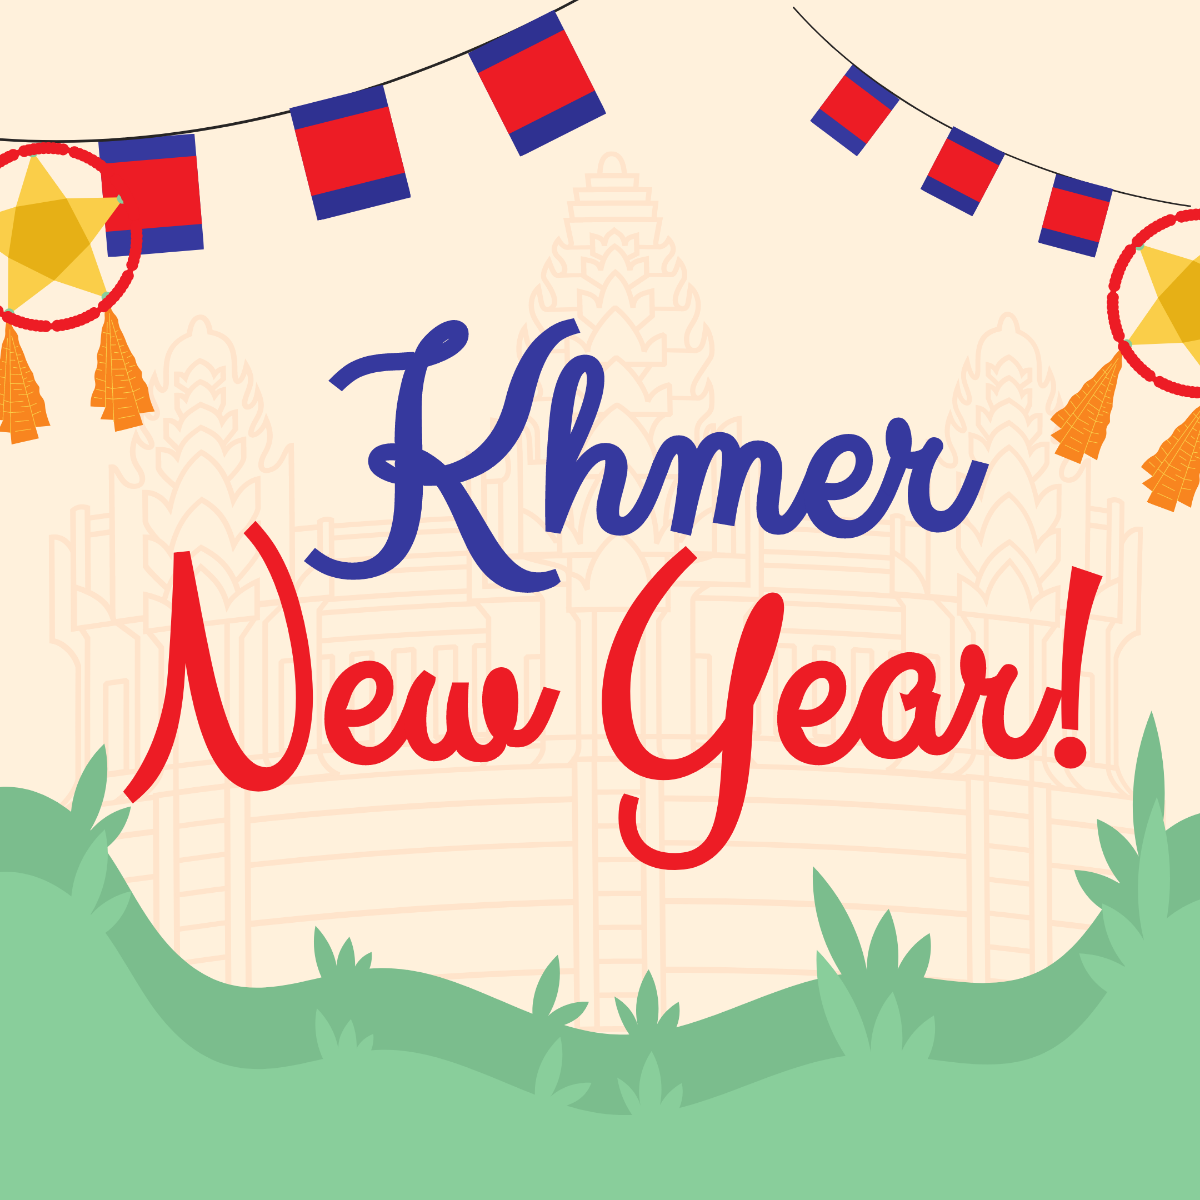 Khmer New Year Image Template